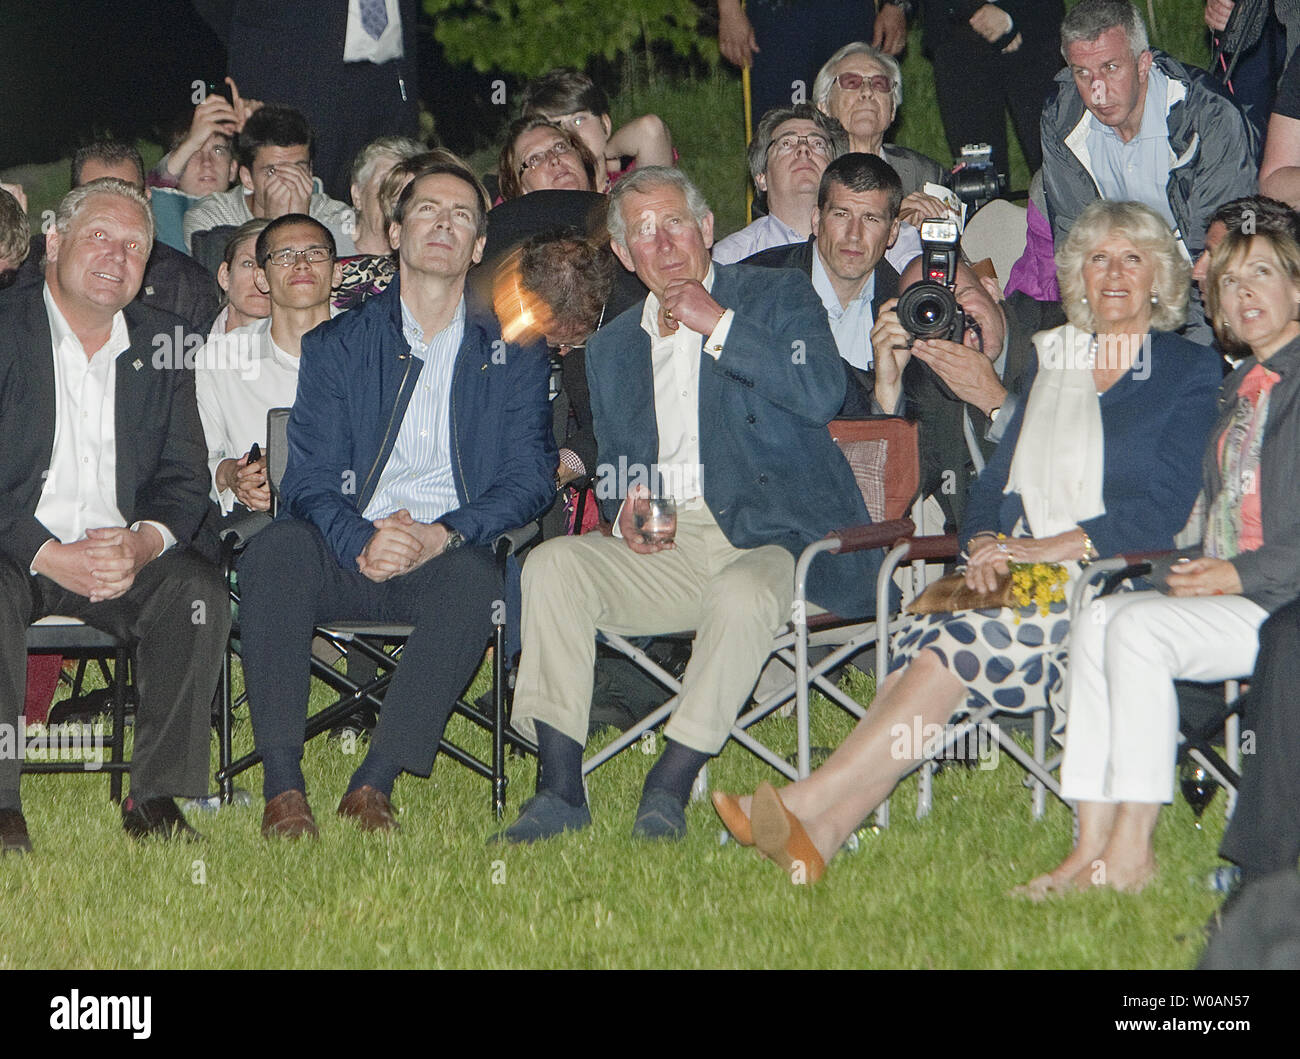 Prince Charles sits with his wife Camilla the Duchess of Cornwall, Ontario Premier Dalton McGuinty and Toronto Mayor Rob Ford (L) as they watch Victoria Day fireworks at Ashbridges Bay in Toronto, Ontario on May 21, 2012 after meeting members of the Ontario emergency services and their families during the second leg of their 2012 Royal Tour to Canada part of Queen Elizabeth's Diamond Jubilee celebrations.     UPI Photo /Heinz Ruckemann Stock Photo